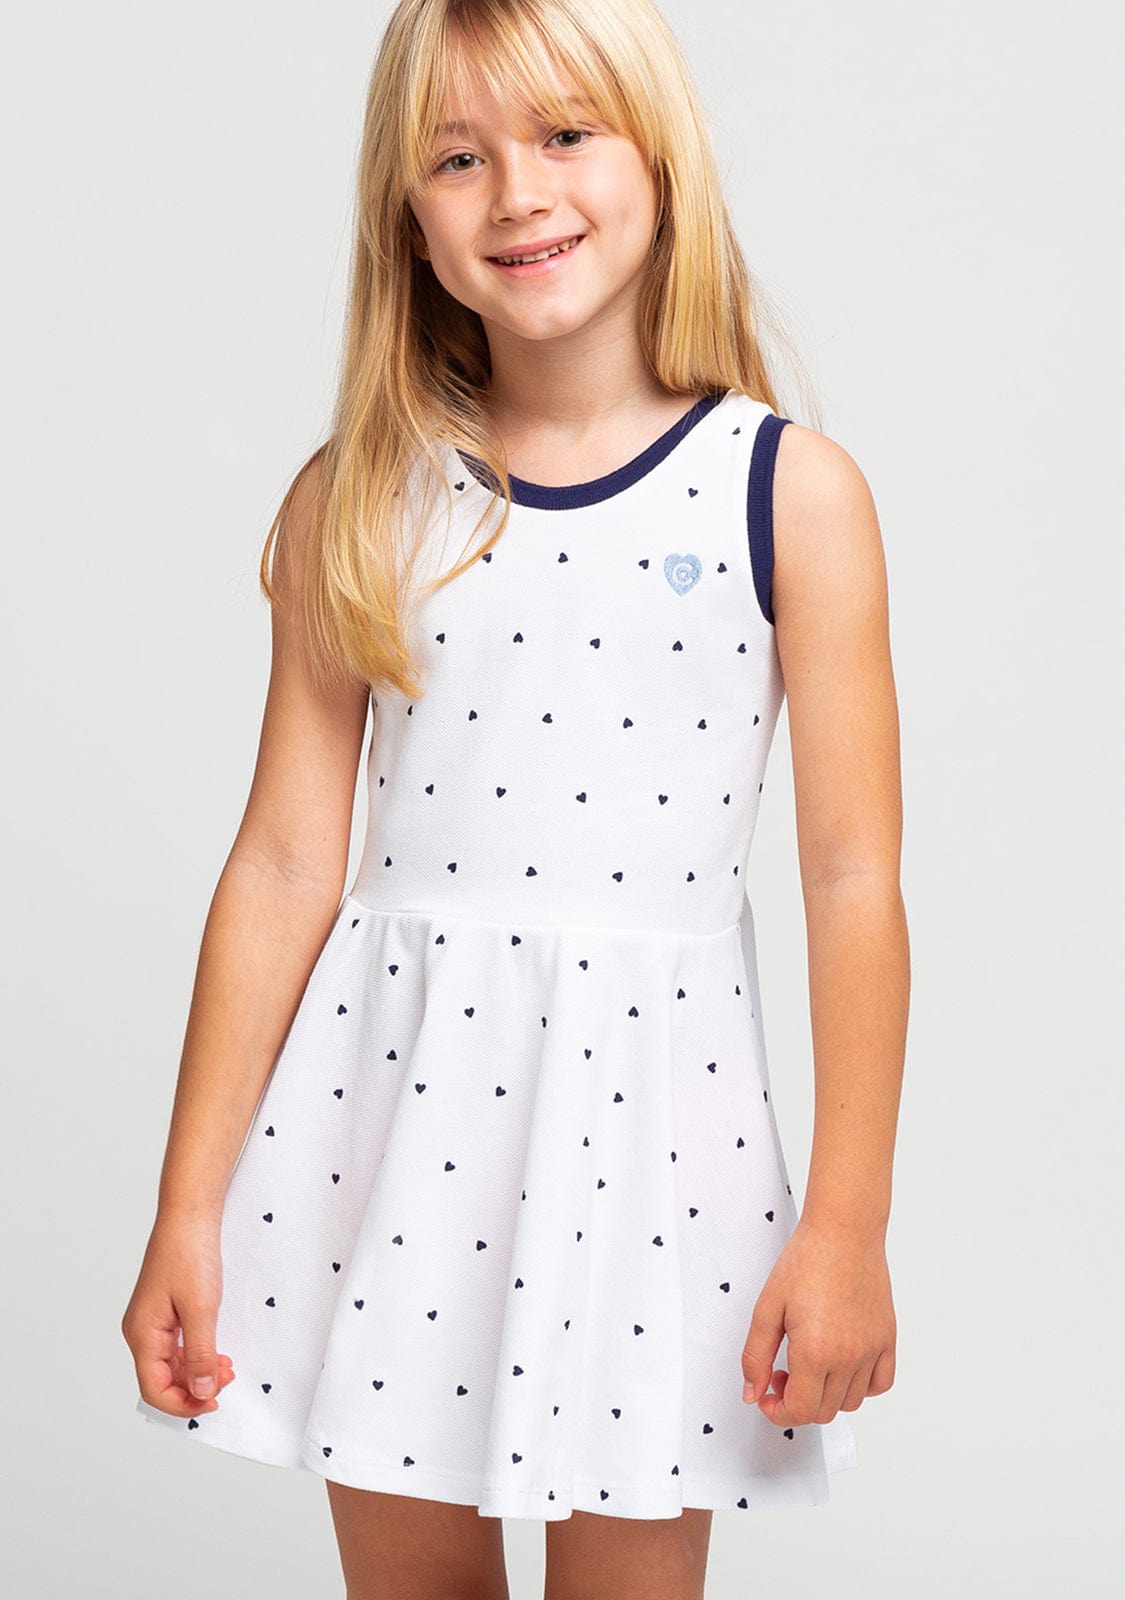 CONGUITOS TEXTIL Clothing Girl's White Hearts Skater Dress